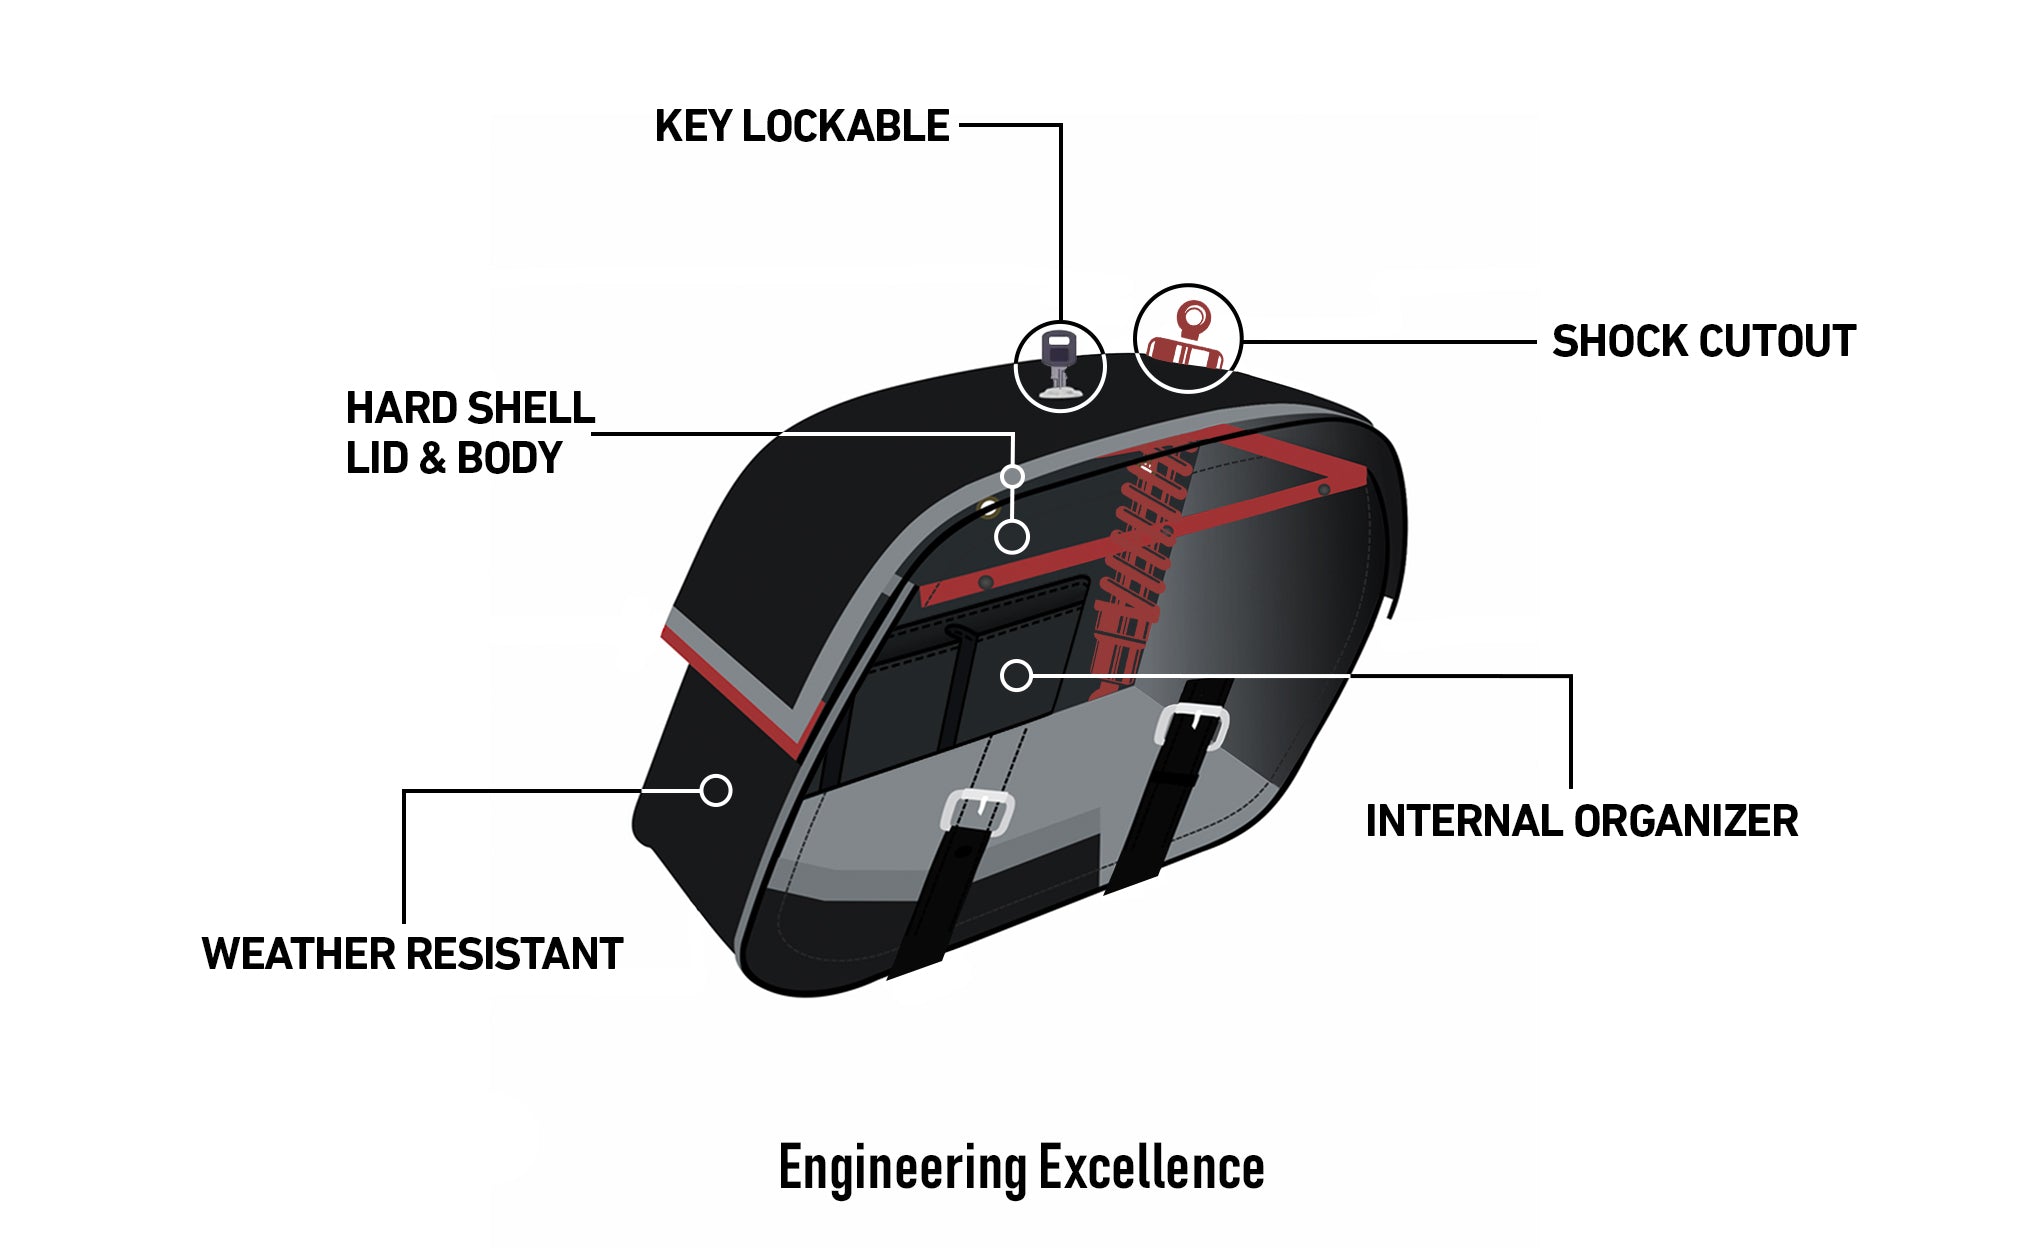 Viking Raven Extra Large Triumph America Shock Cut Out Leather Motorcycle Saddlebags Engineering Excellence with Bag on Bike @expand